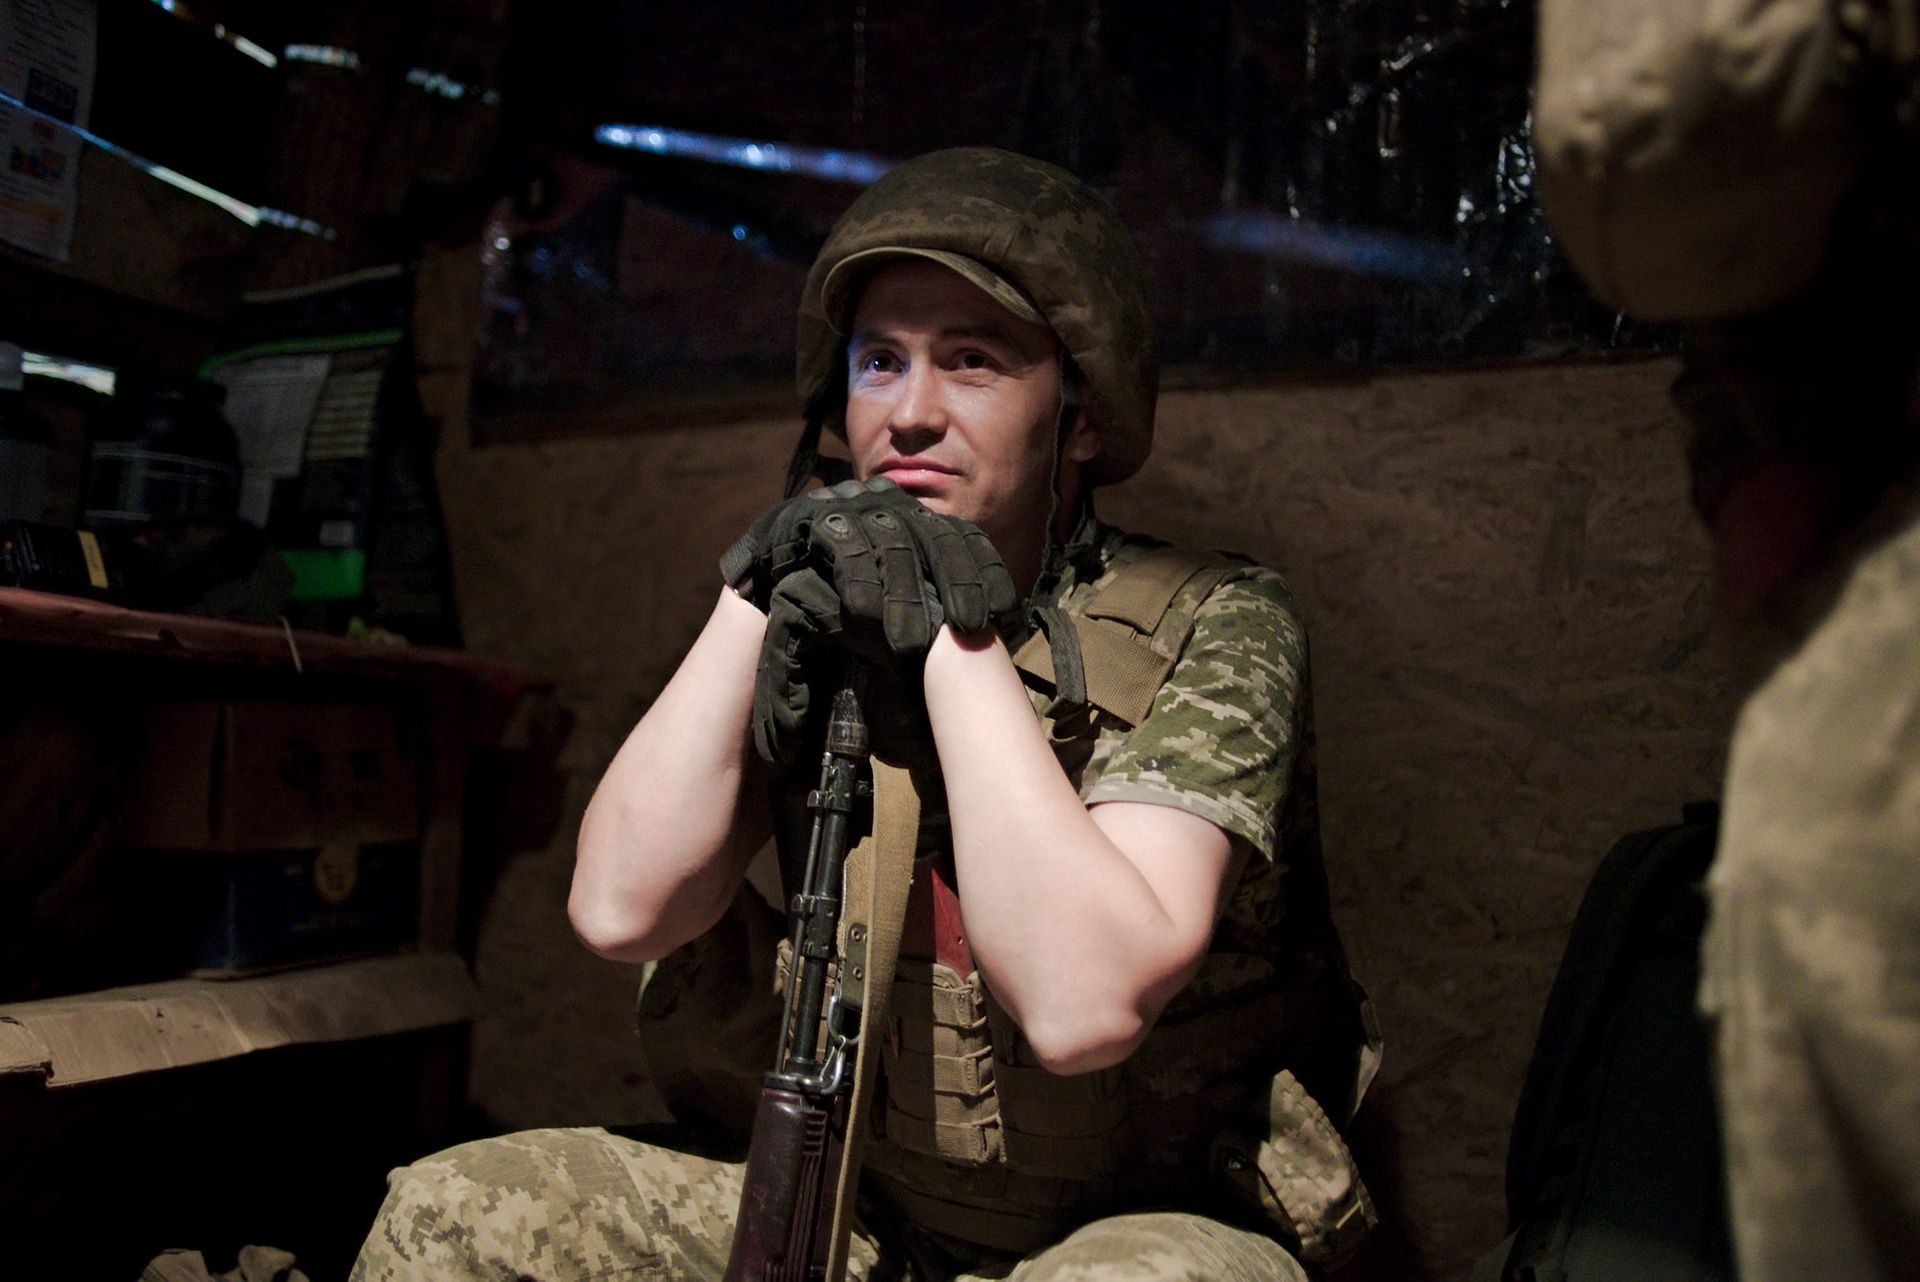 Journey to the front lines. How the ceasefire impacts the Ukrainian army